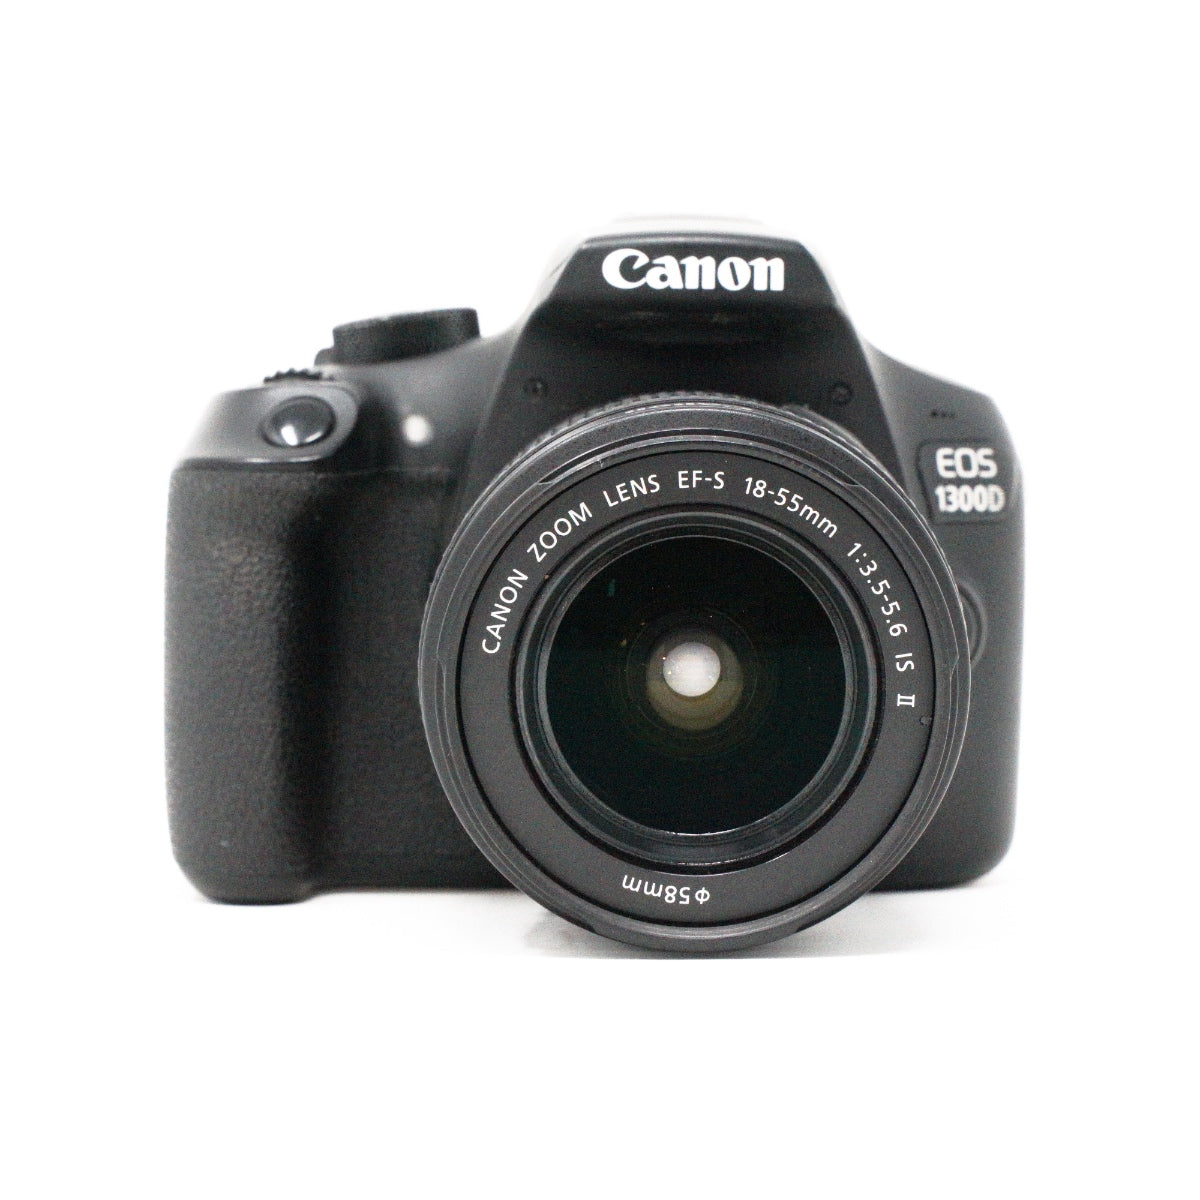 Used Canon EOS 1300D + 18-55mm F3.5/5.6 II Kit